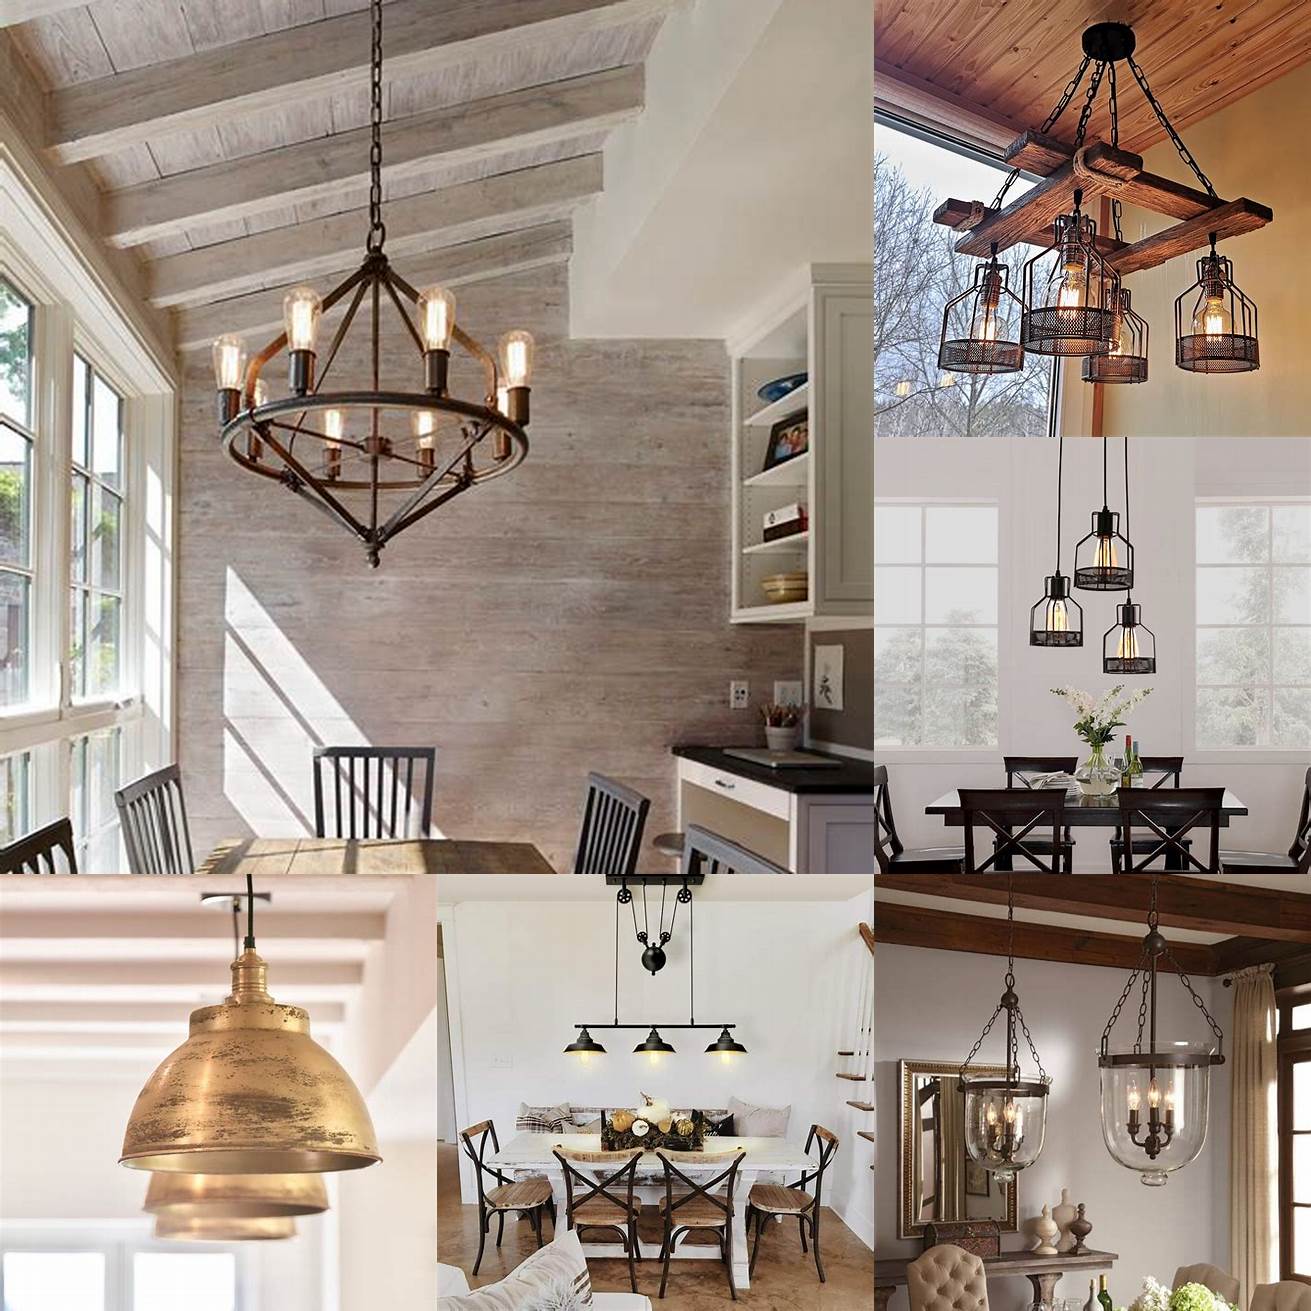 Brass Pendant Light in a Rustic Dining Room